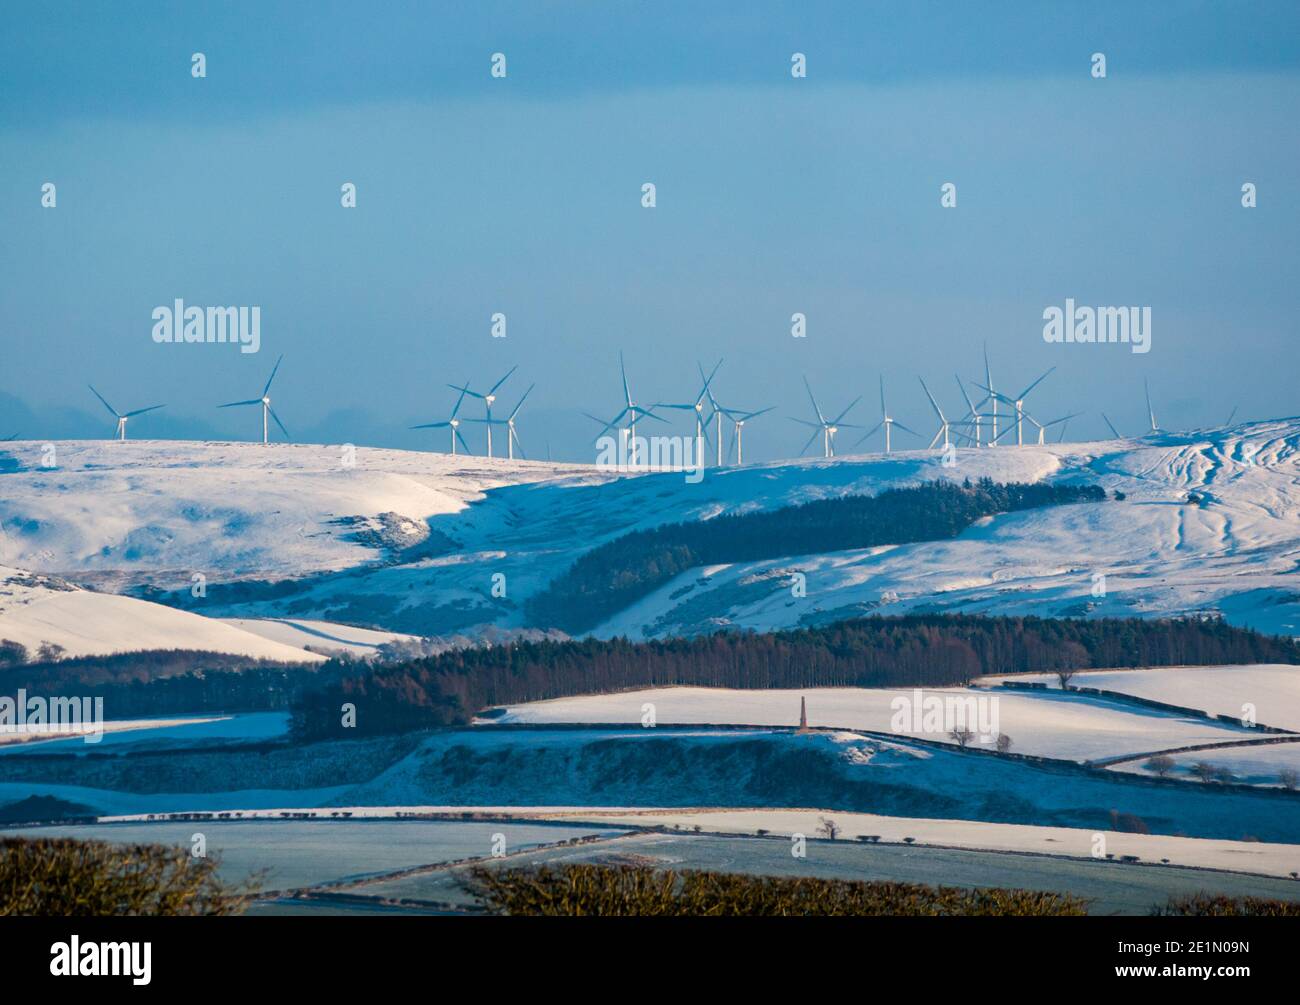 East Lothian, Scotland, United Kingdom, 8th January 2021. UK Weather: snow covers most of the county from the Garleton Hills southwards to the Lammermuir Hills on a bright clear sunny day with wind turbines clearly visible in the distance Stock Photo